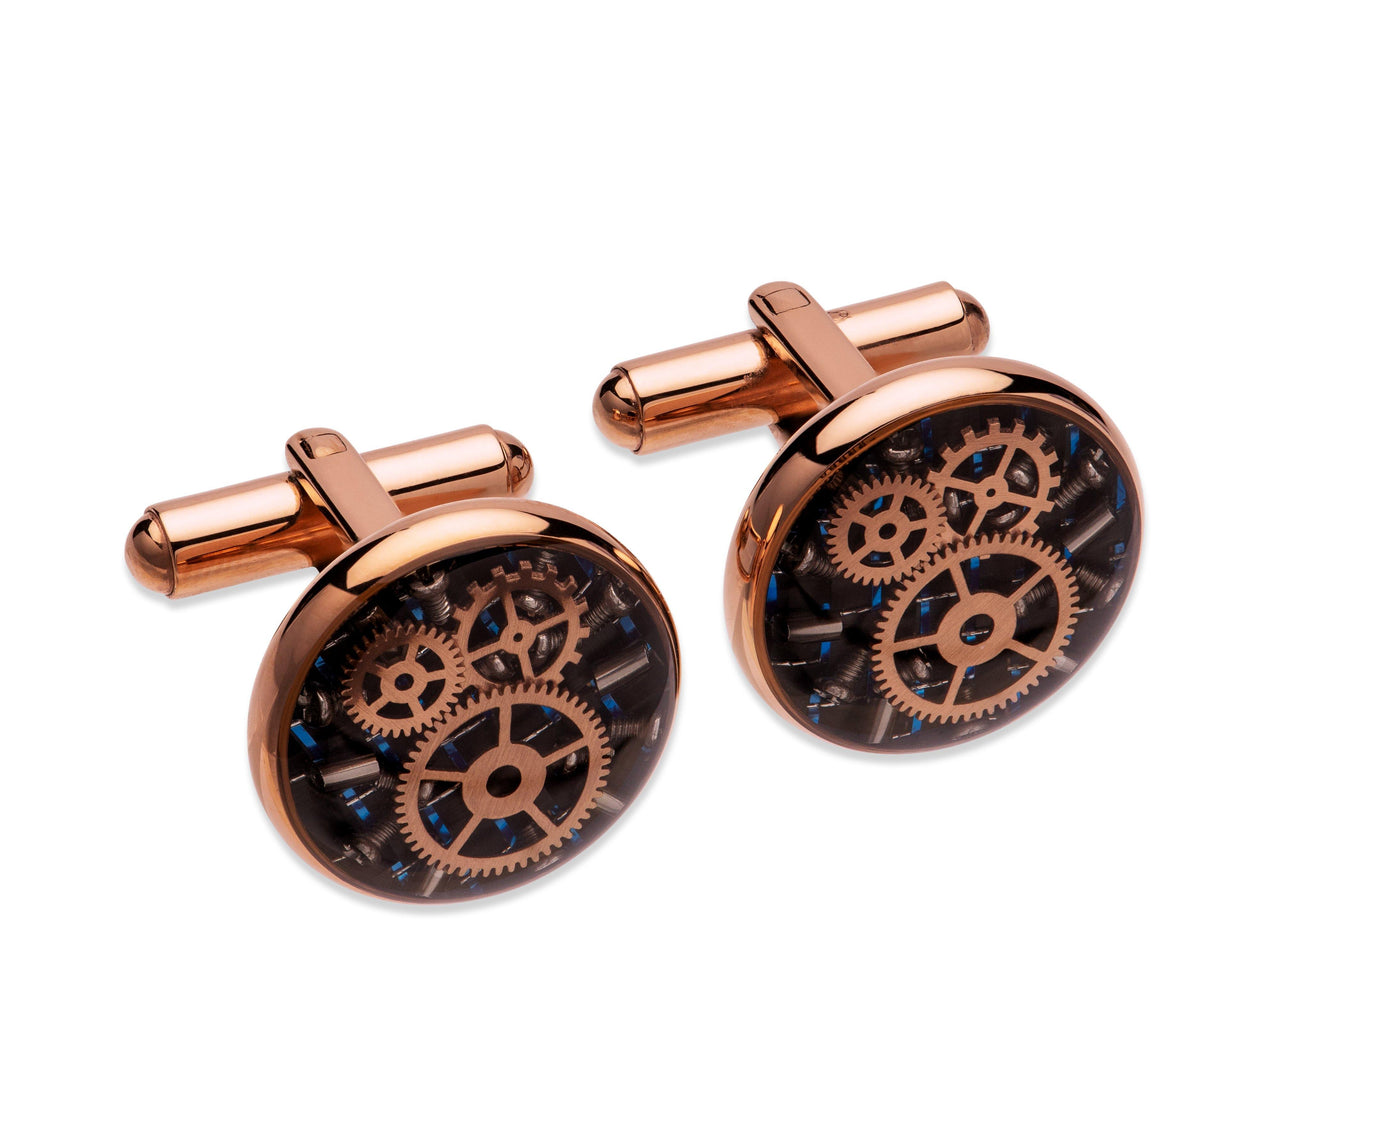 Unique & Co Stainless Steel Gear Parts Cufflinks - Rococo Jewellery